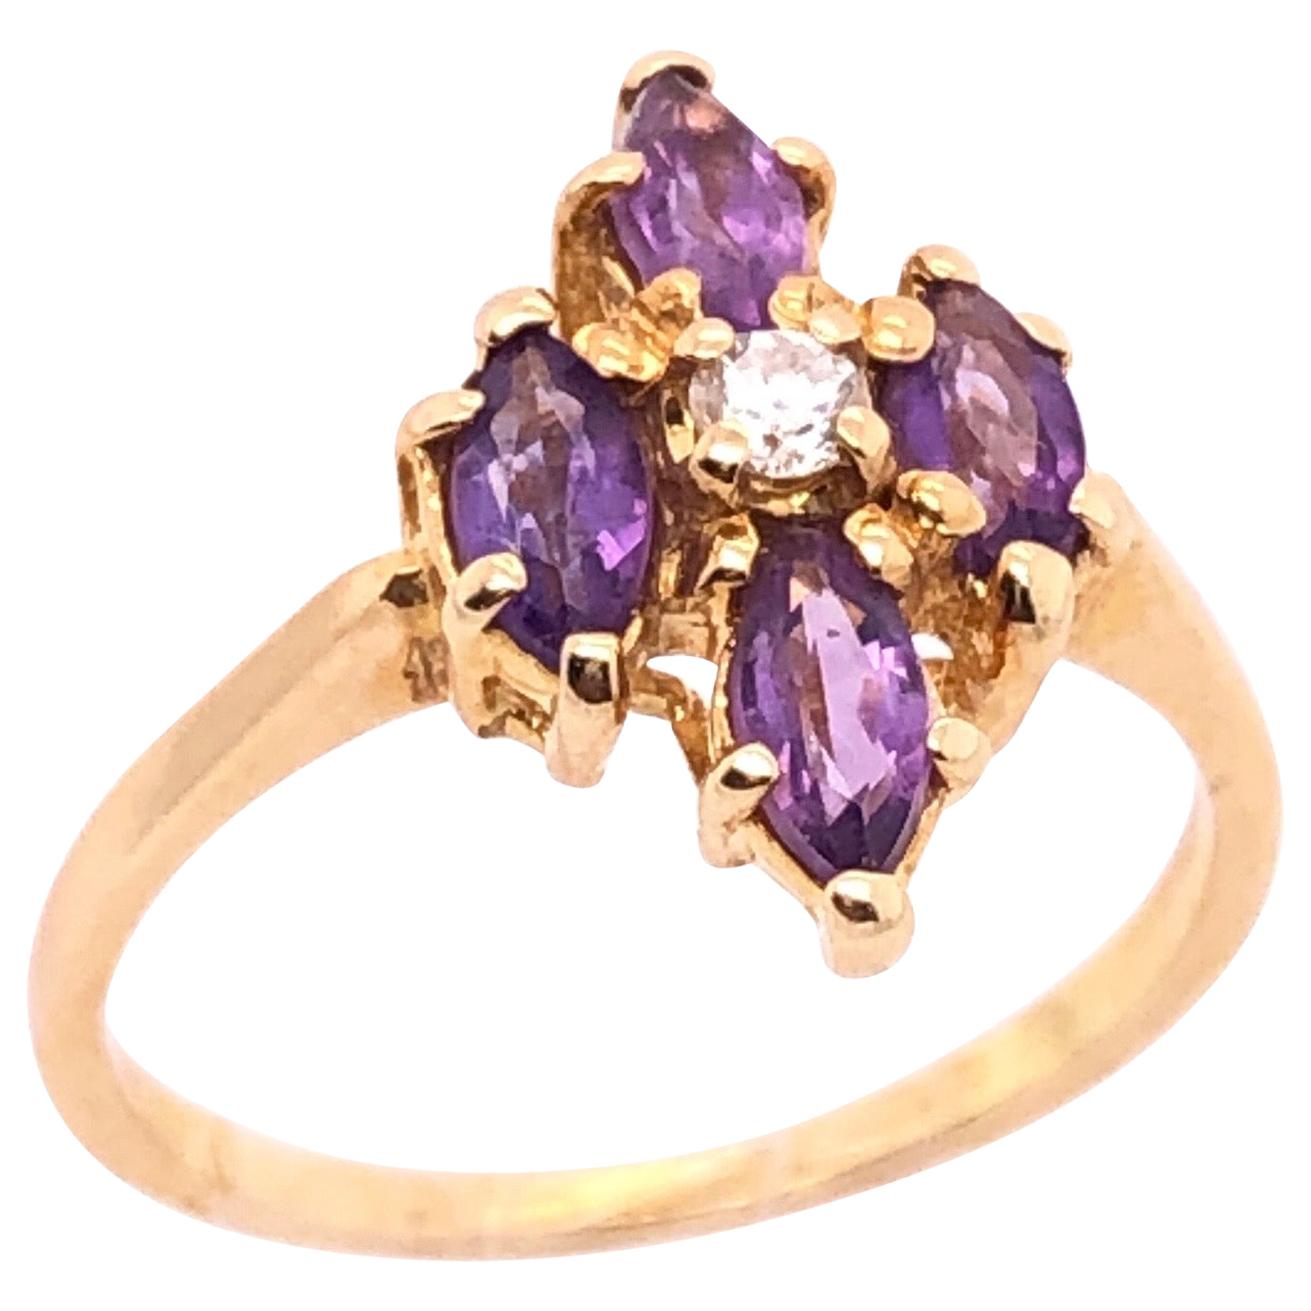 14 Karat Yellow Gold Fashion Amethyst Ring with Center Diamond For Sale